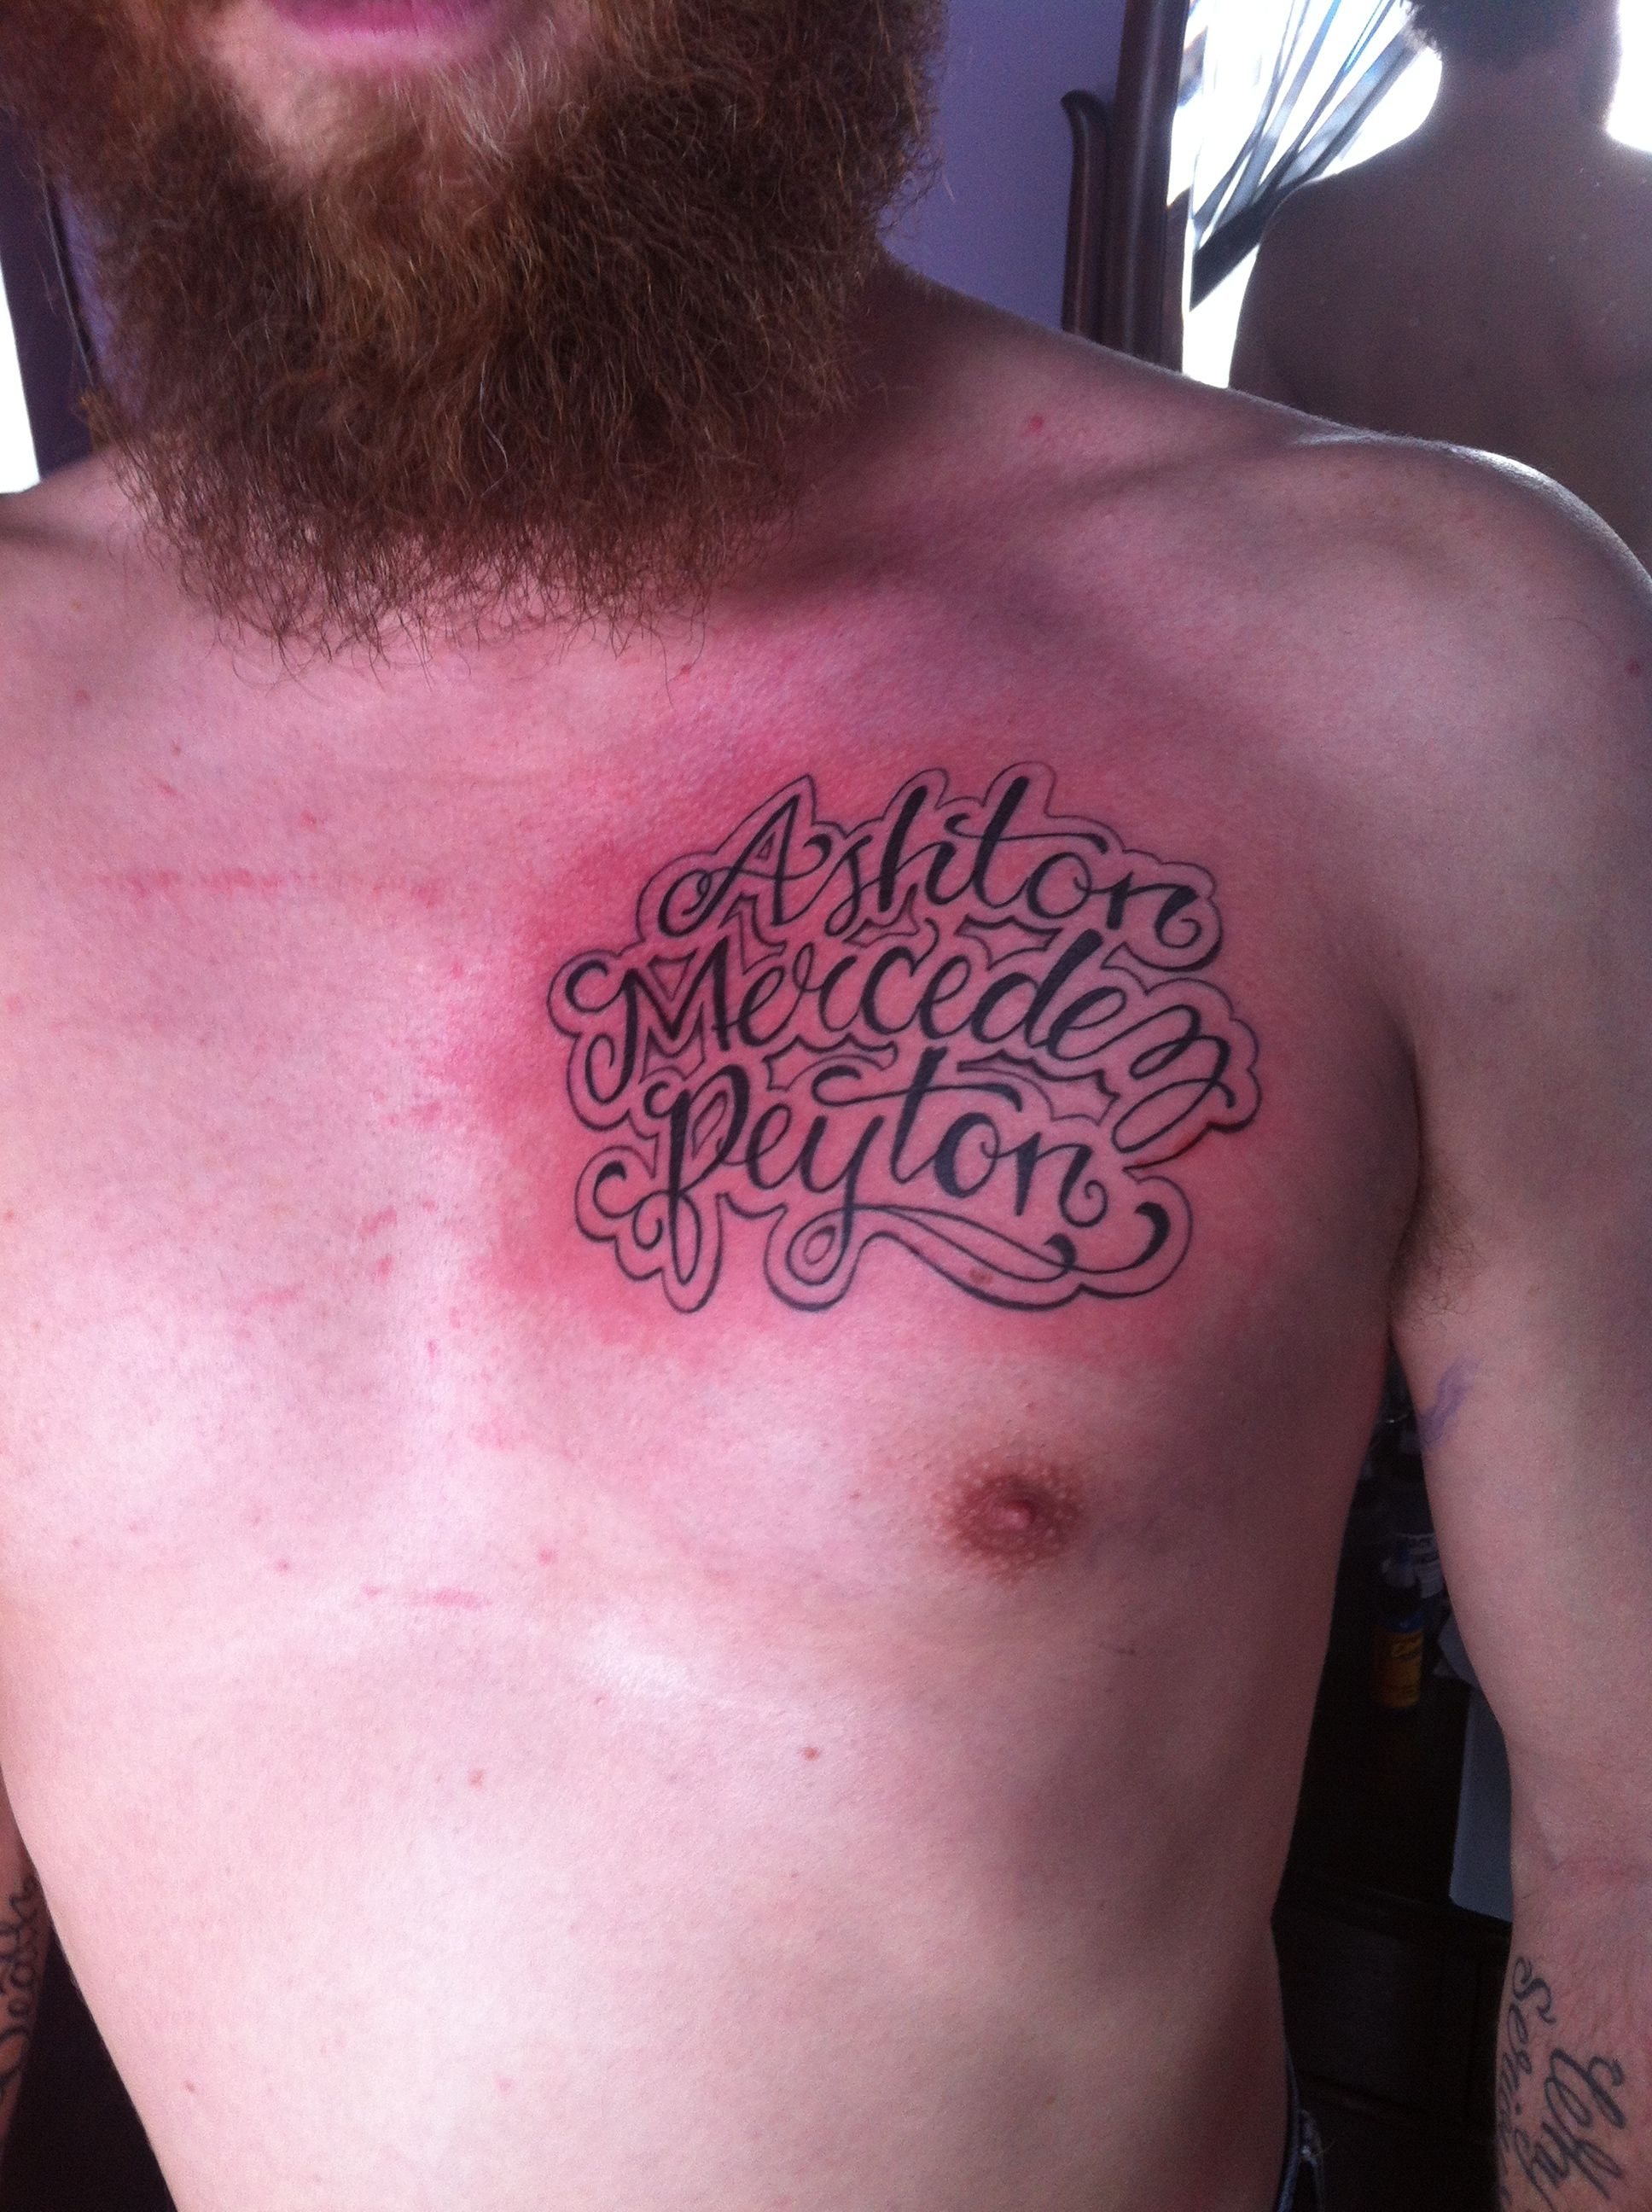 Chest Tattoo Of Kids Names Placement Of Tattoo Tattoos For Him within dimensions 1936 X 2592